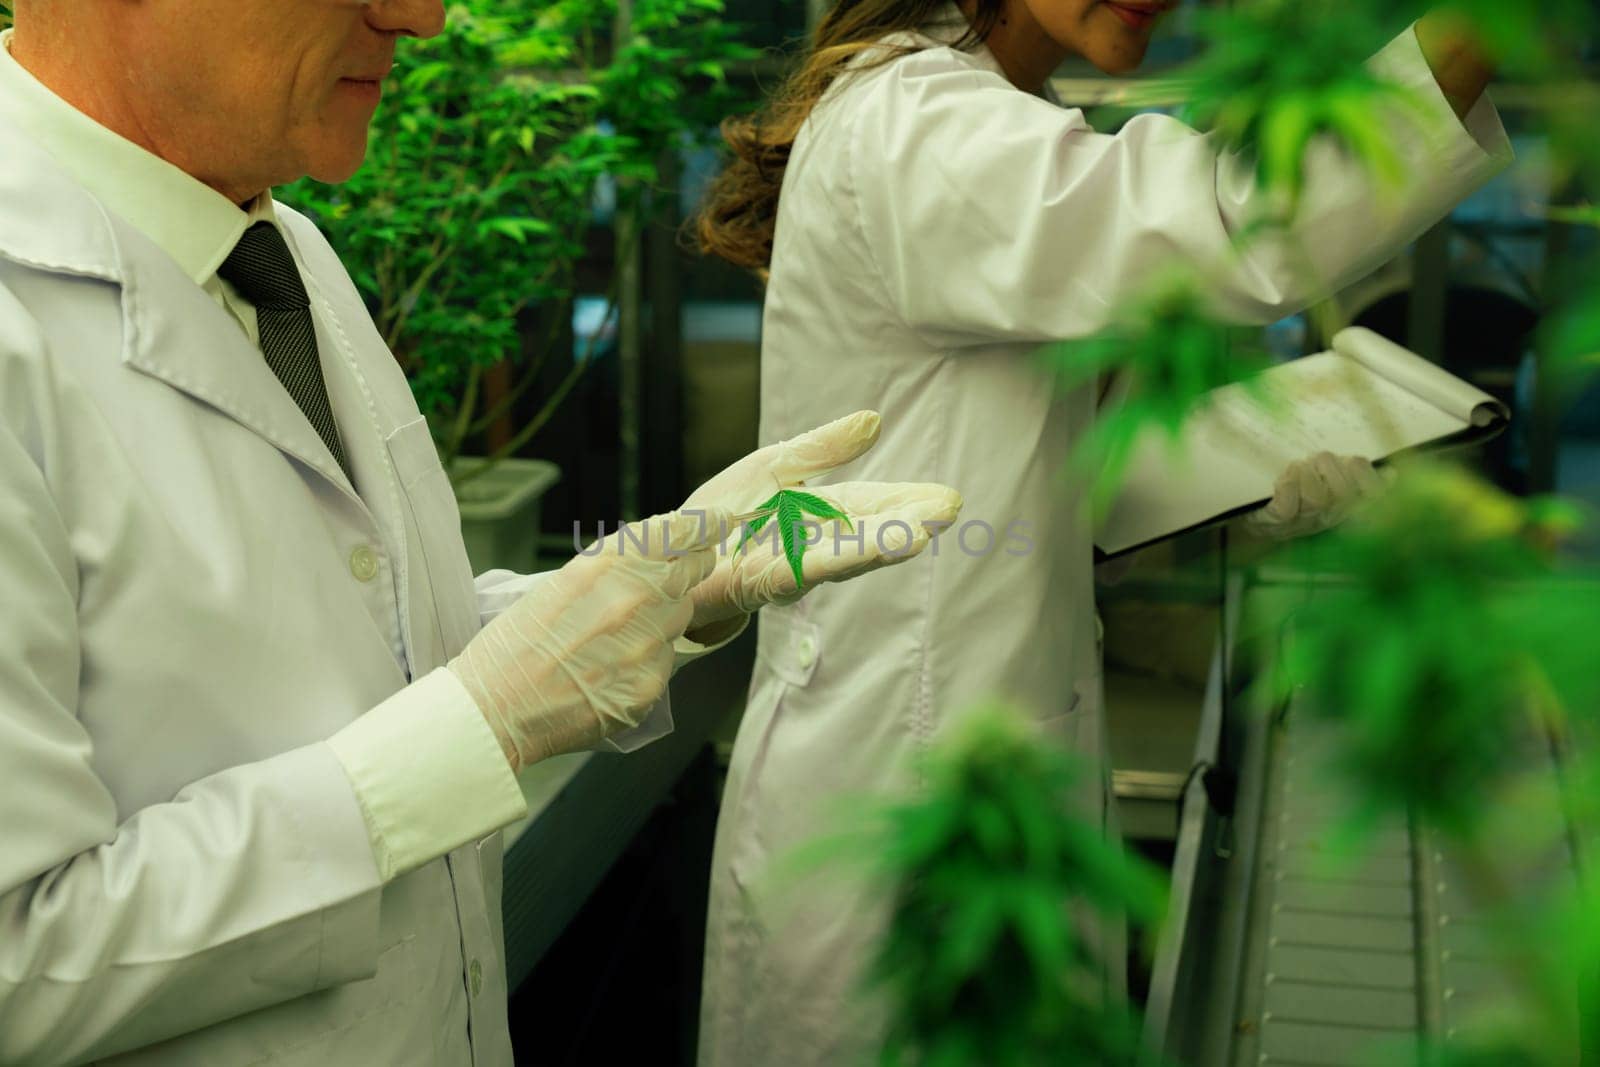 Scientists researching cannabis hemp and marijuana plants in gratifying indoor curative cannabis plants farm. Cannabis plants for medicinal cannabis products for healthcare and medical purposes.